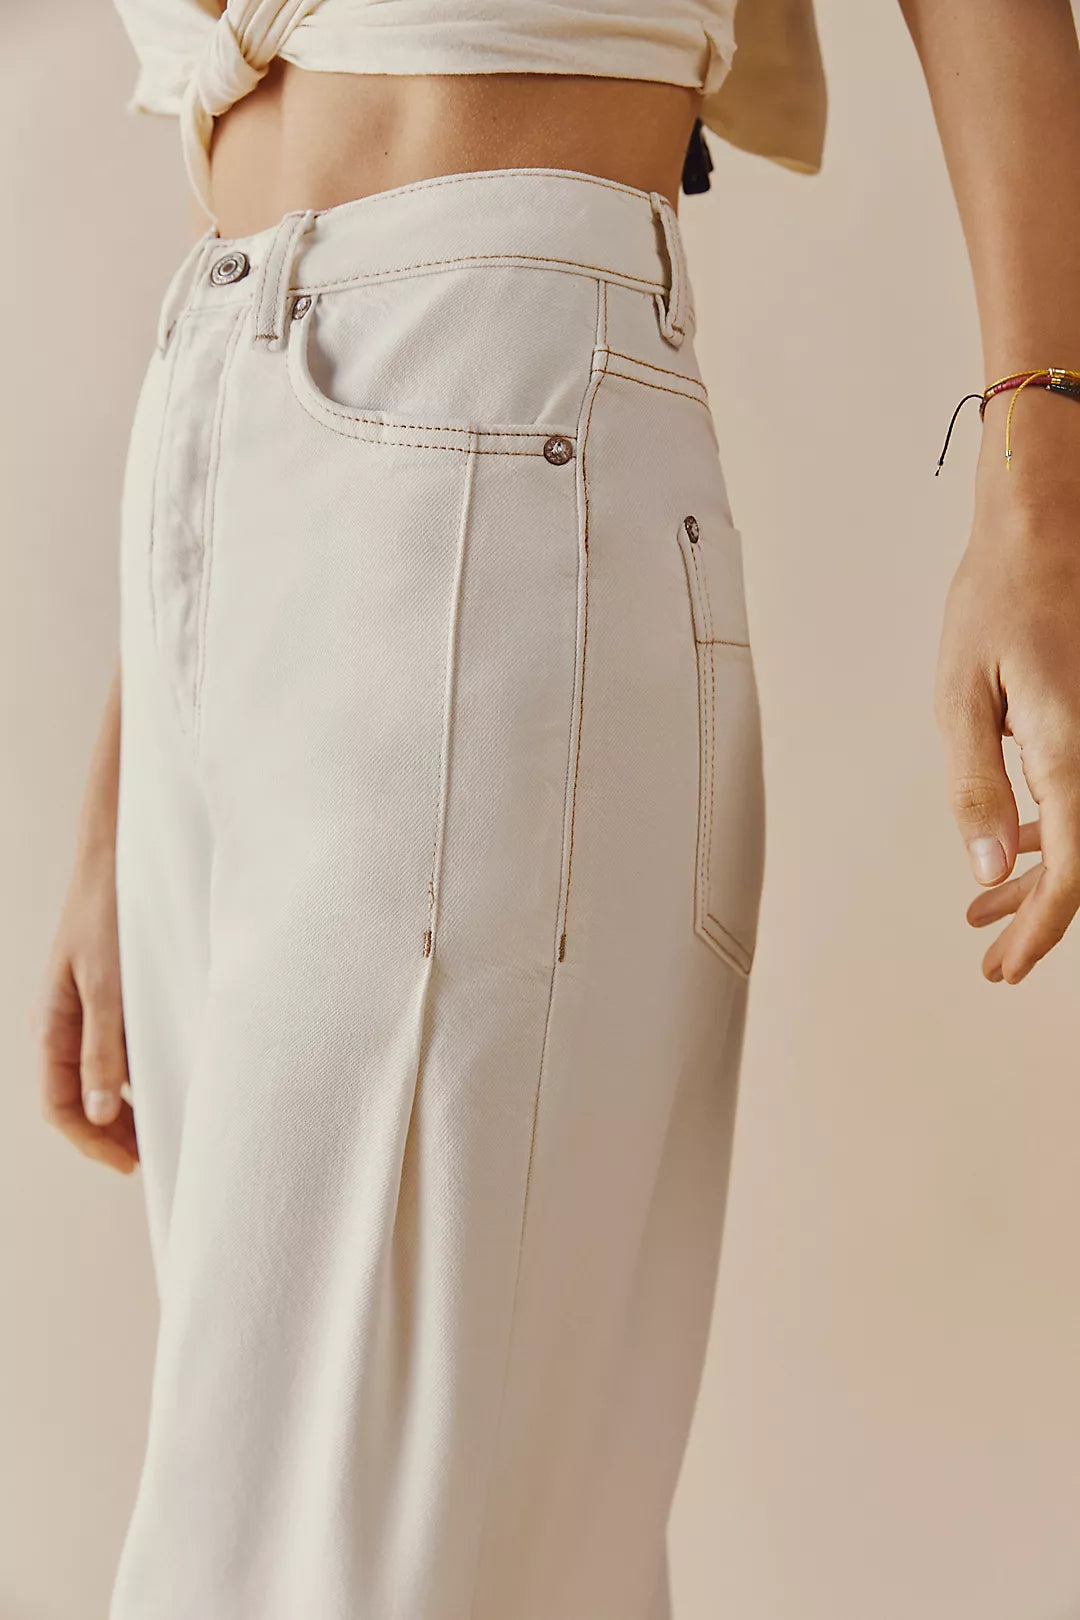 Free People Old West Slouchy Pants